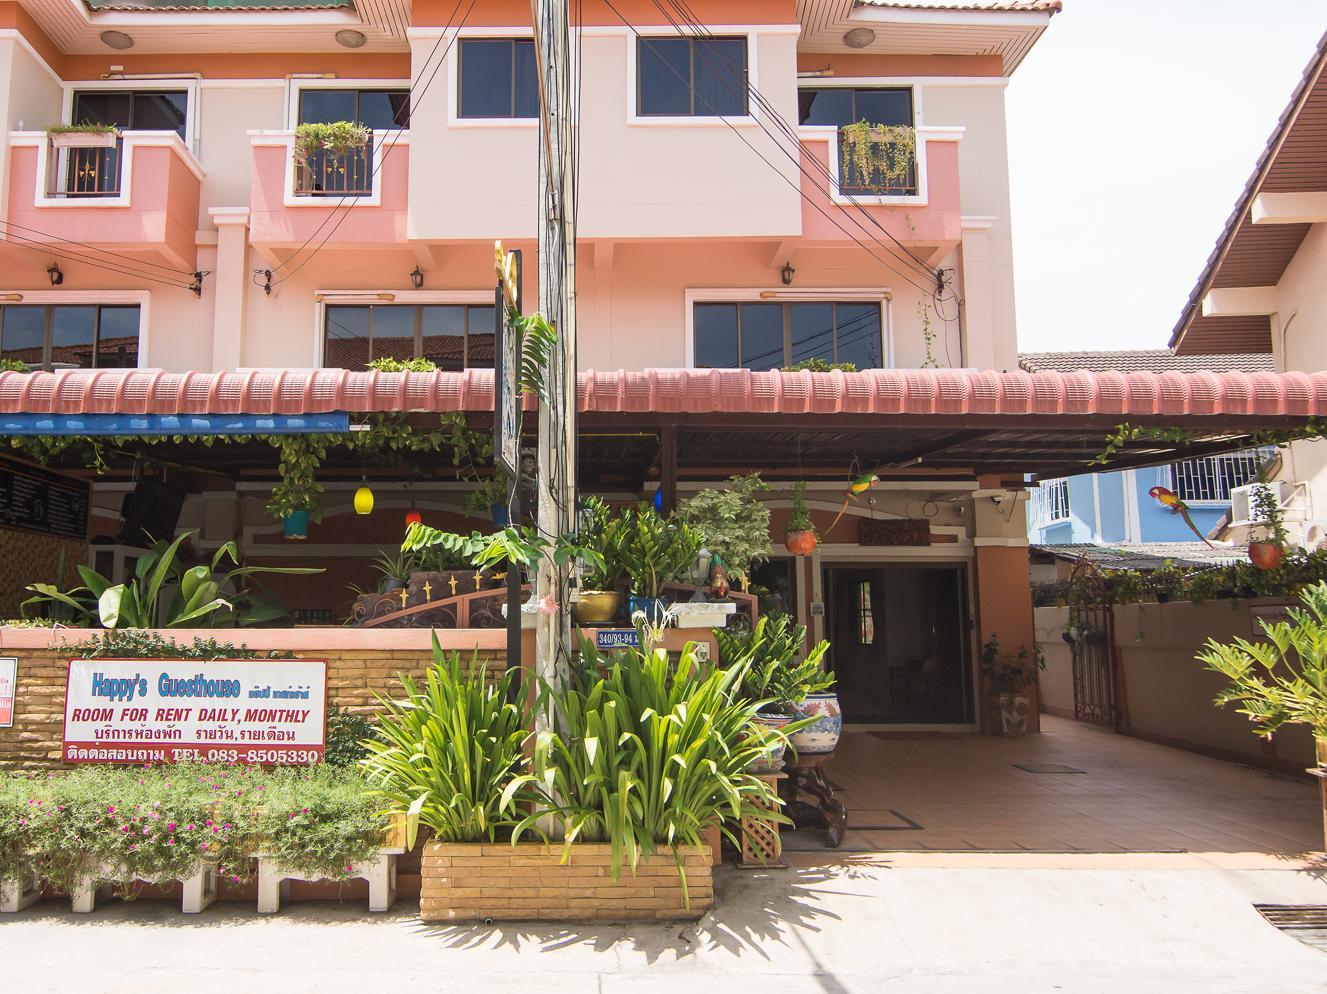 Happys Guesthouse Pattaya Thailand FAQ 2016, What facilities are there in Happys Guesthouse Pattaya Thailand 2016, What Languages Spoken are Supported in Happys Guesthouse Pattaya Thailand 2016, Which payment cards are accepted in Happys Guesthouse Pattaya Thailand , Thailand Happys Guesthouse Pattaya room facilities and services Q&A 2016, Thailand Happys Guesthouse Pattaya online booking services 2016, Thailand Happys Guesthouse Pattaya address 2016, Thailand Happys Guesthouse Pattaya telephone number 2016,Thailand Happys Guesthouse Pattaya map 2016, Thailand Happys Guesthouse Pattaya traffic guide 2016, how to go Thailand Happys Guesthouse Pattaya, Thailand Happys Guesthouse Pattaya booking online 2016, Thailand Happys Guesthouse Pattaya room types 2016.